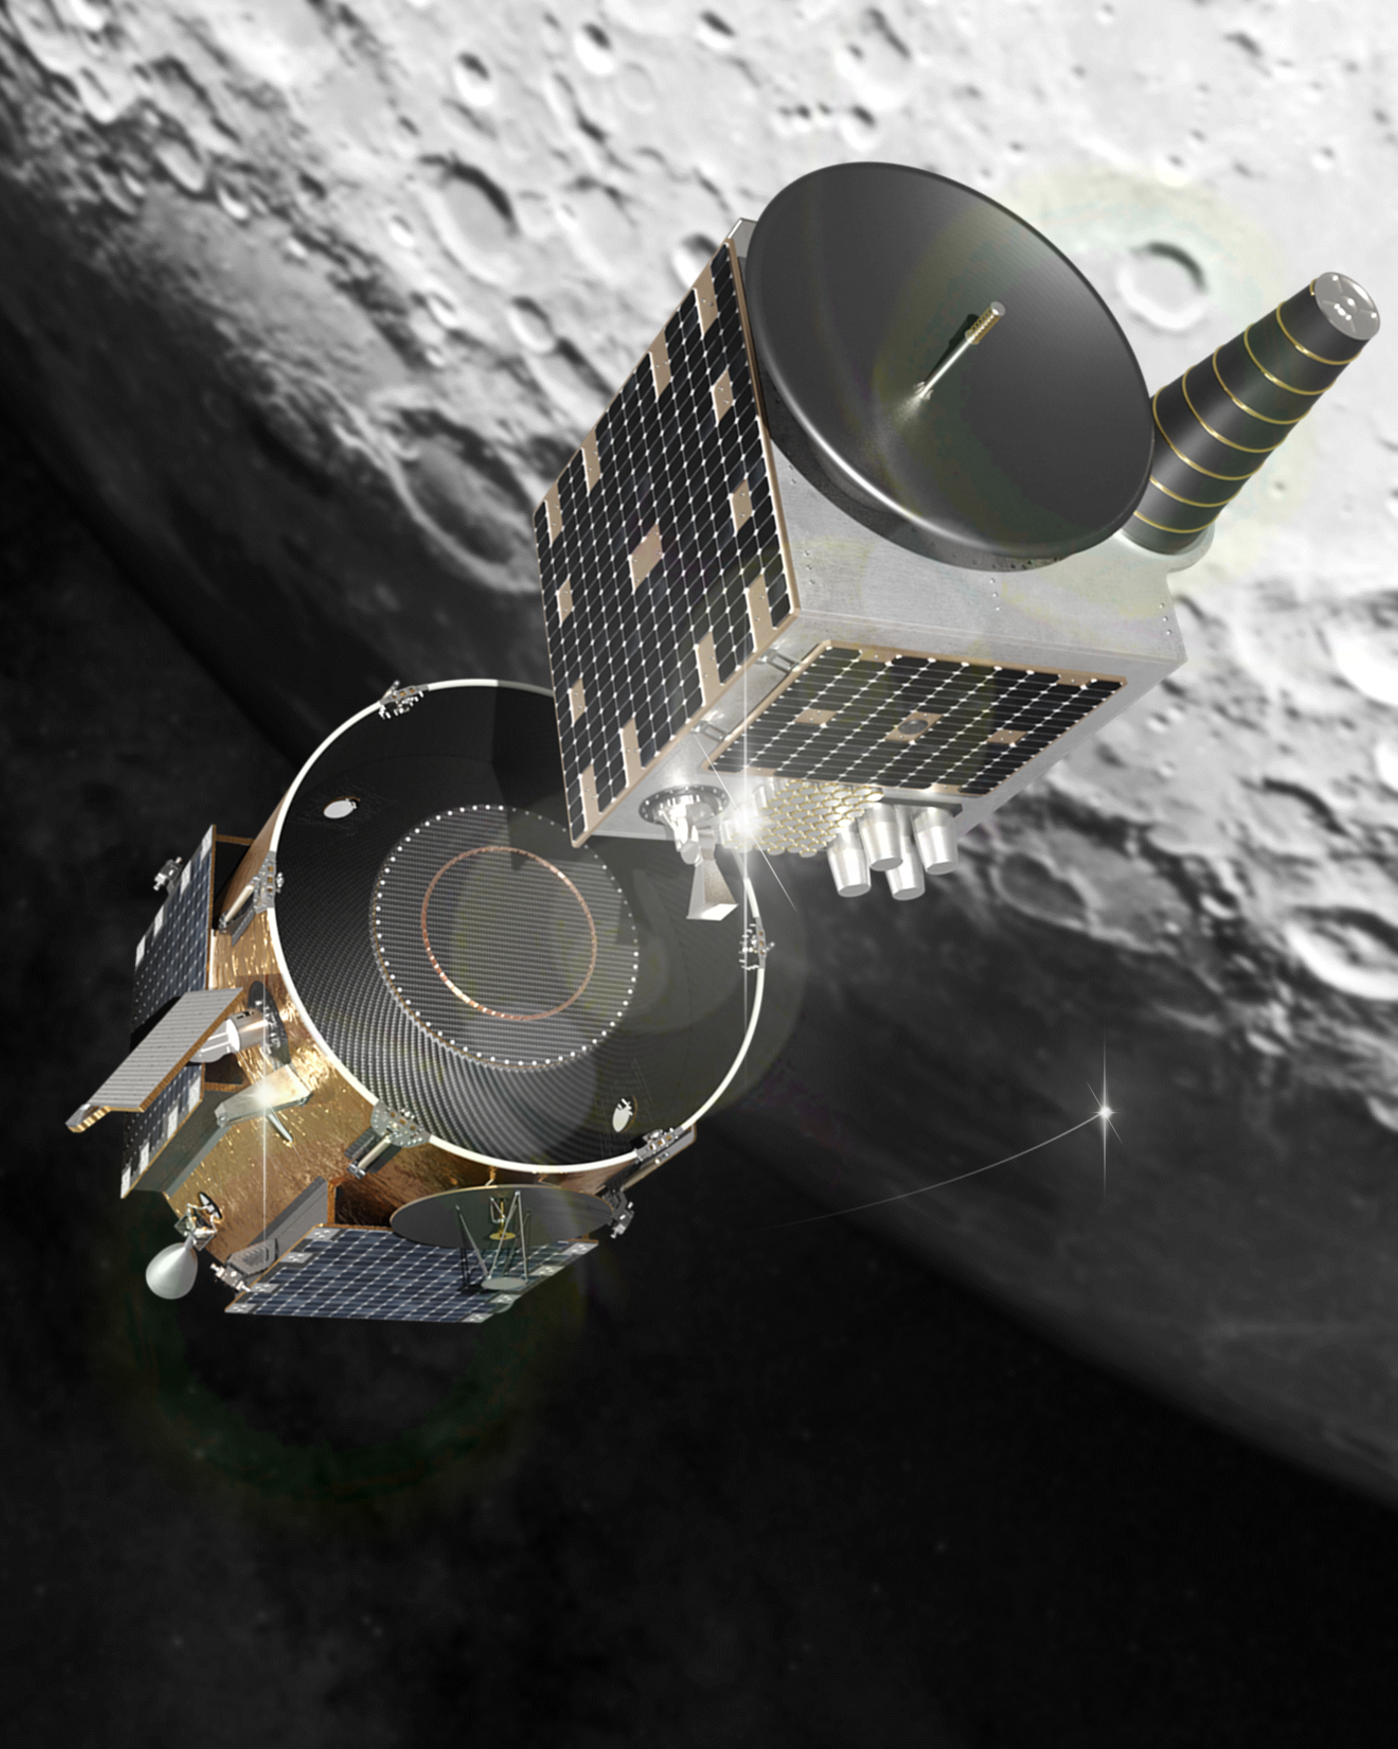 Depiction of Firefly's Blue Ghost transfer vehicle deploying the European Lunar Pathfinder satellite to lunar orbit.  (Image: Firefly Aerospace)